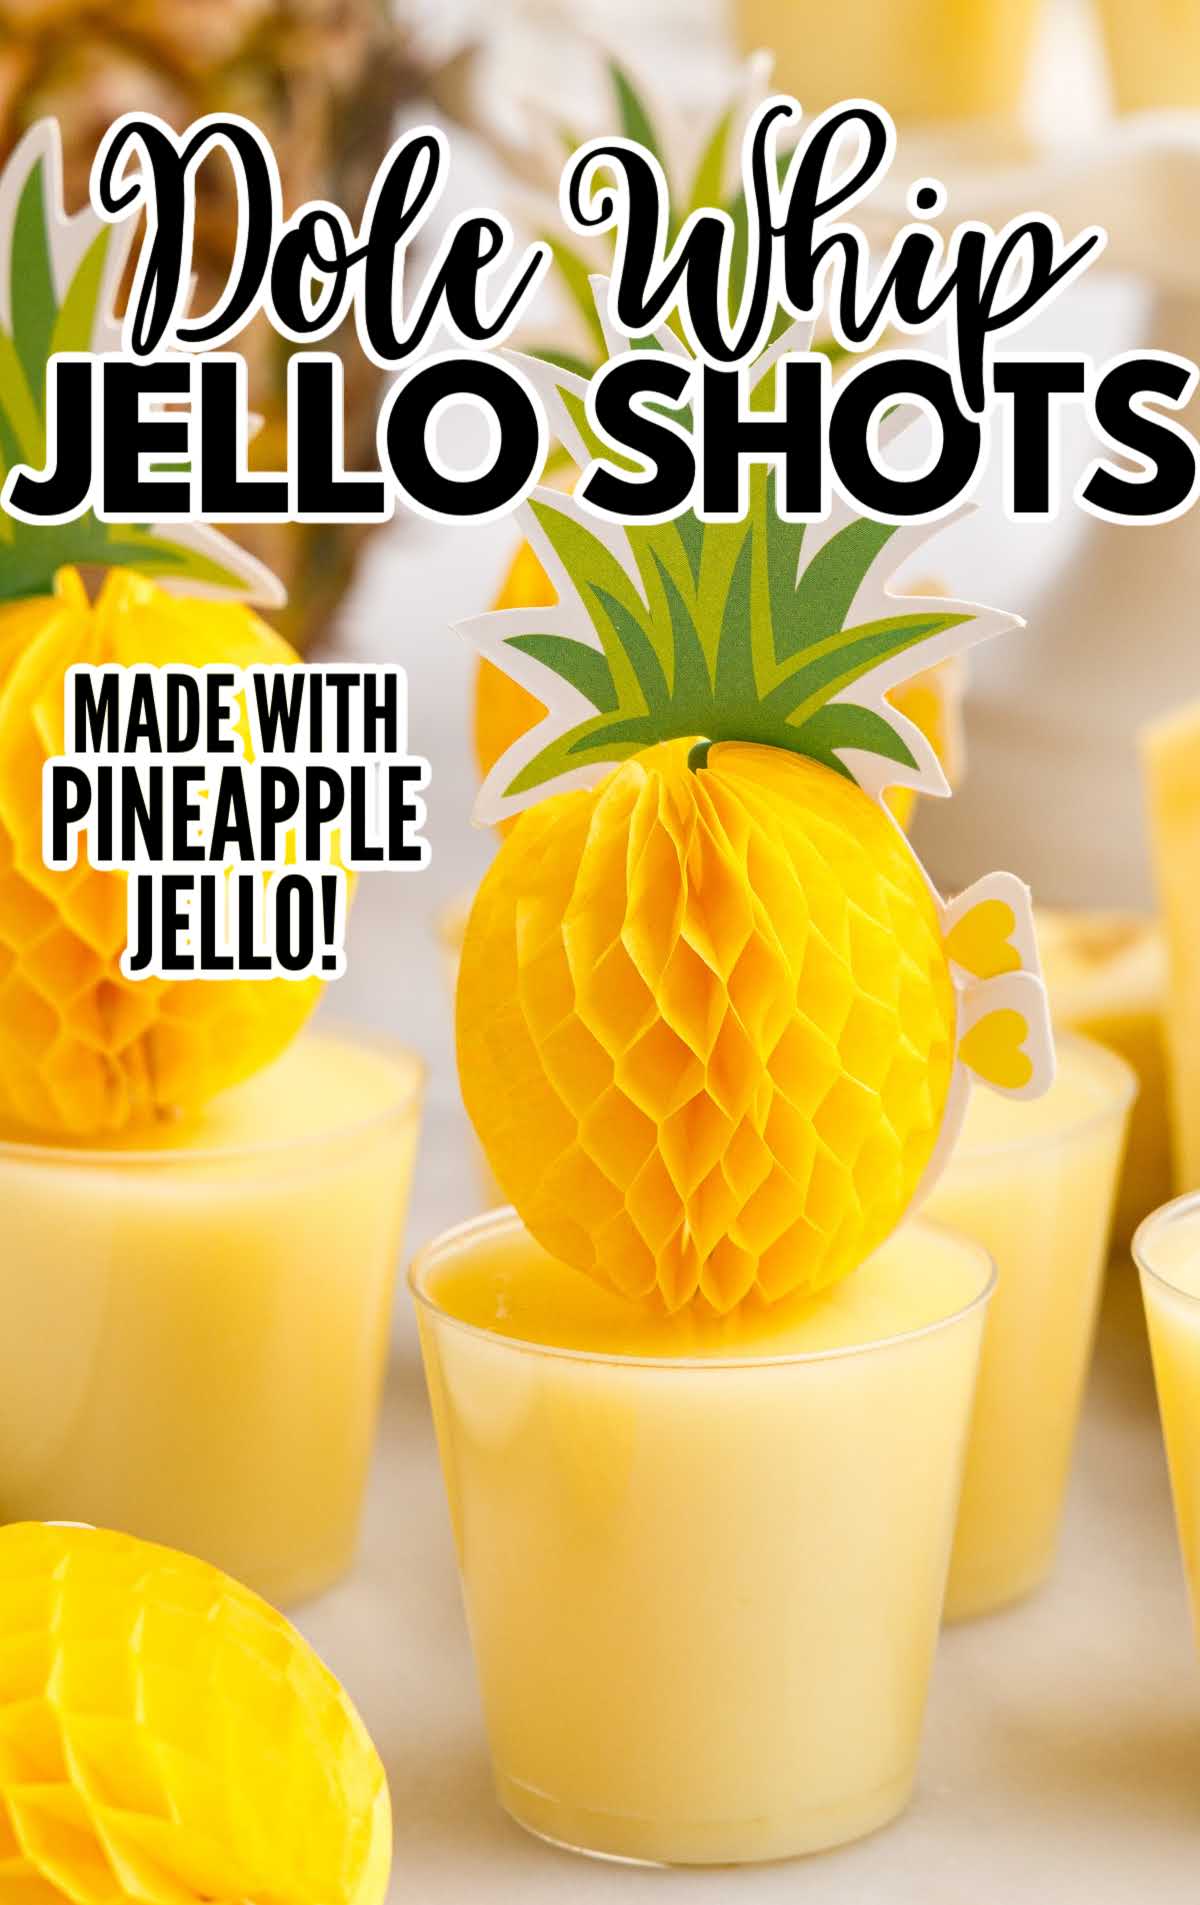 A glass of orange juice, with Jello shot and Pineapple